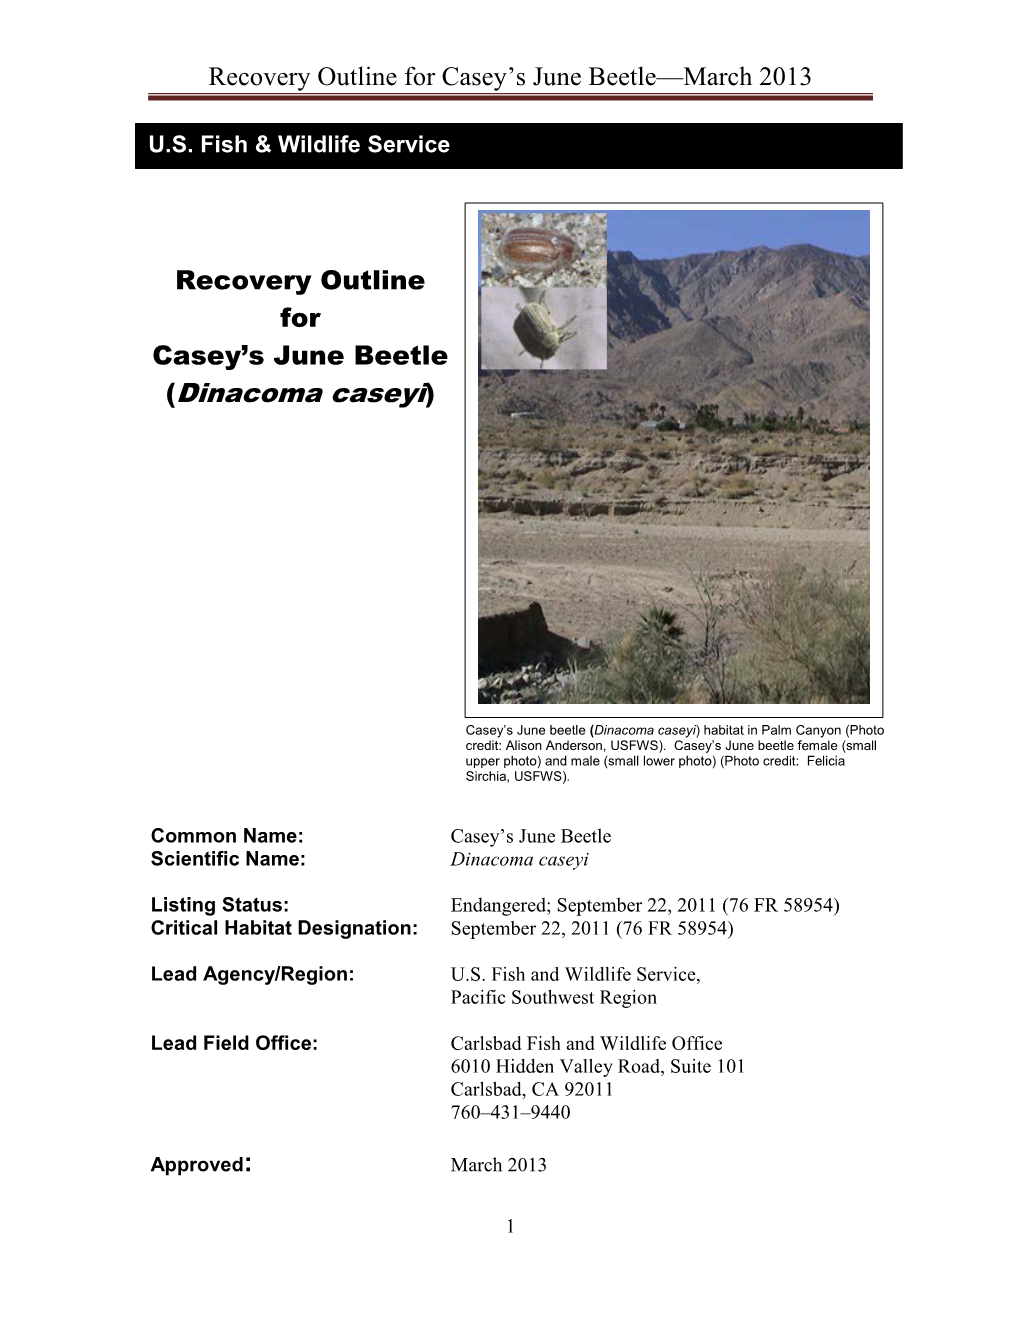 Recovery Outline for Casey's June Beetle—March 2013